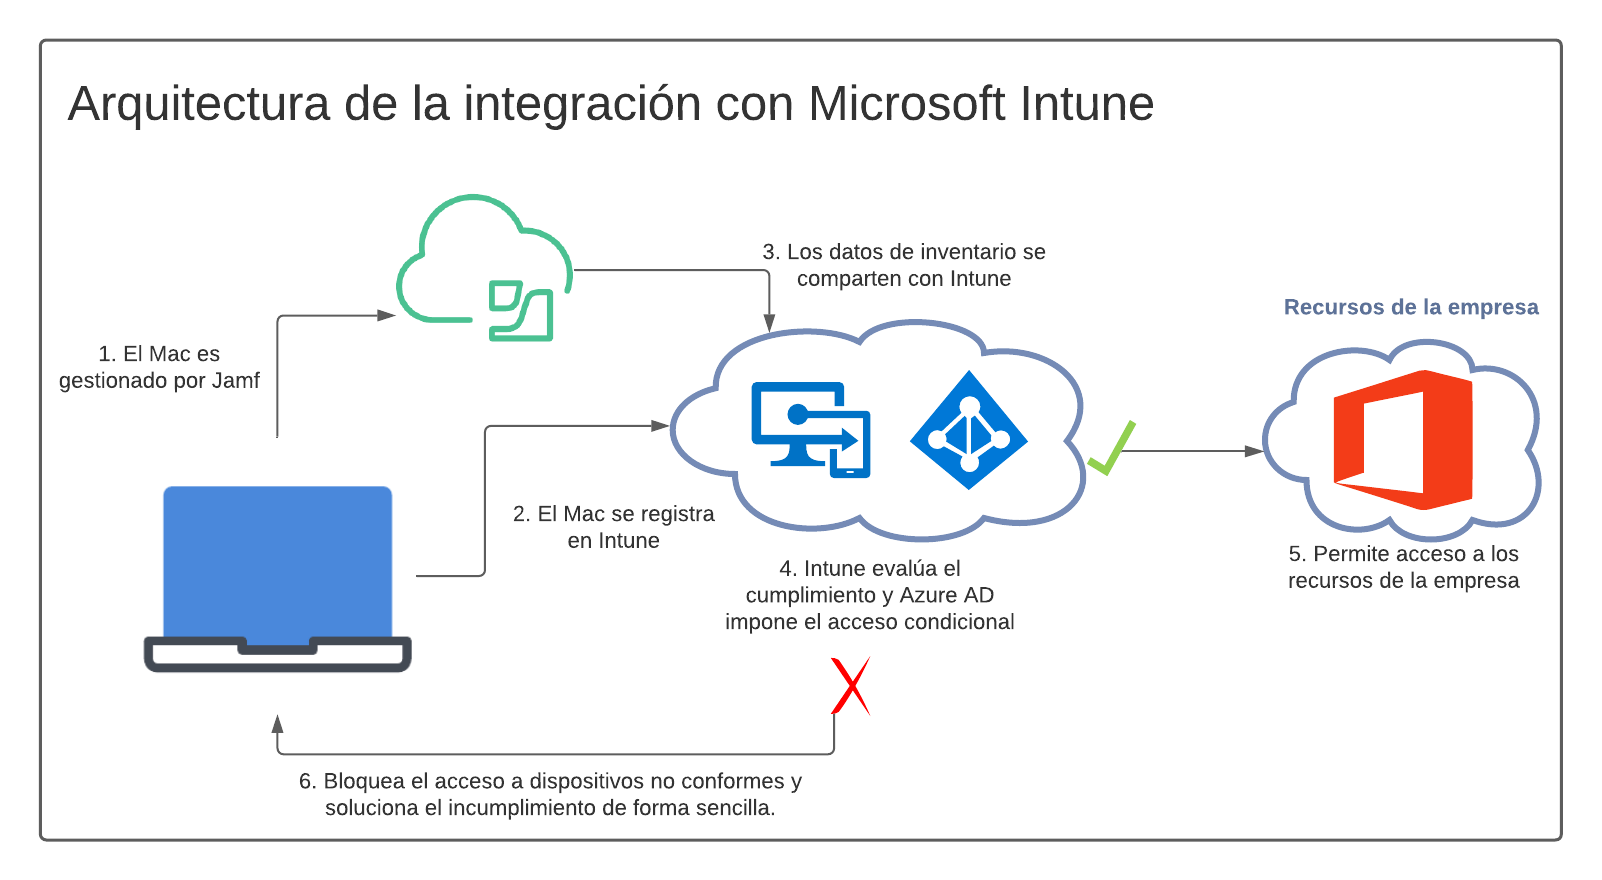 images/download/attachments/85400259/ES_Microsoft_Intune_Integration_Architecture.png